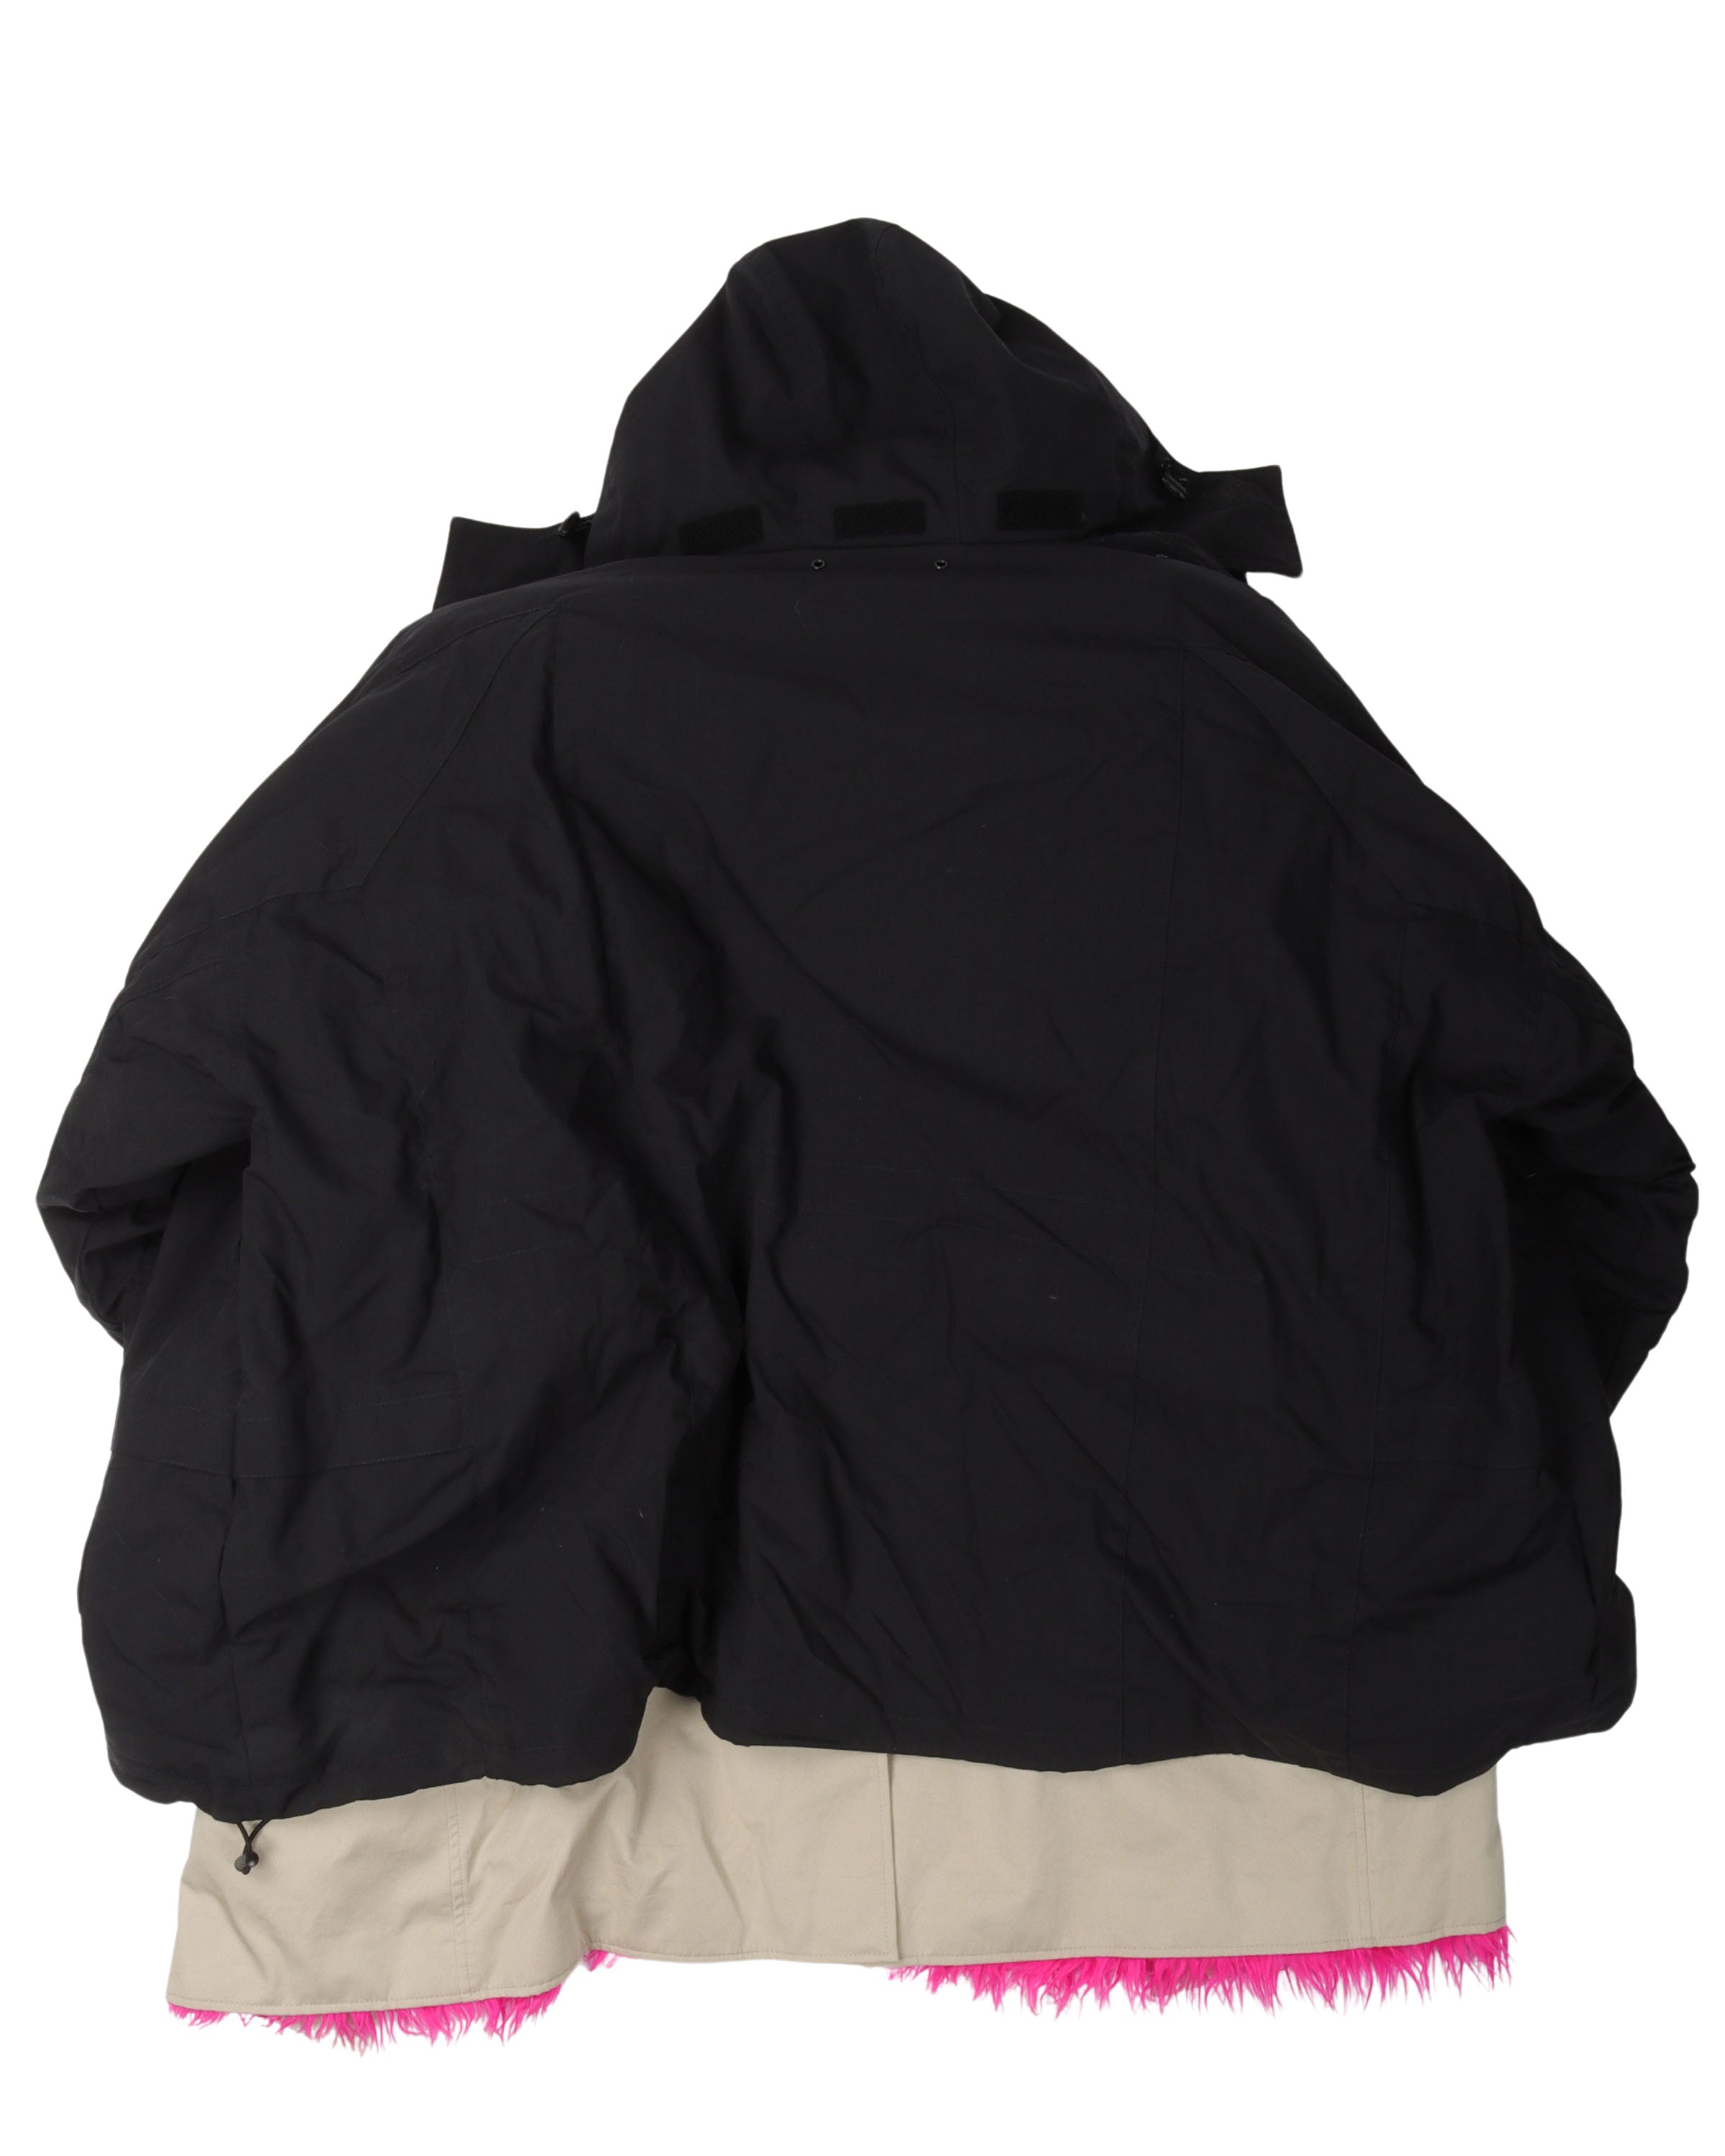 Seven Layer Parka Staff Only Jacket